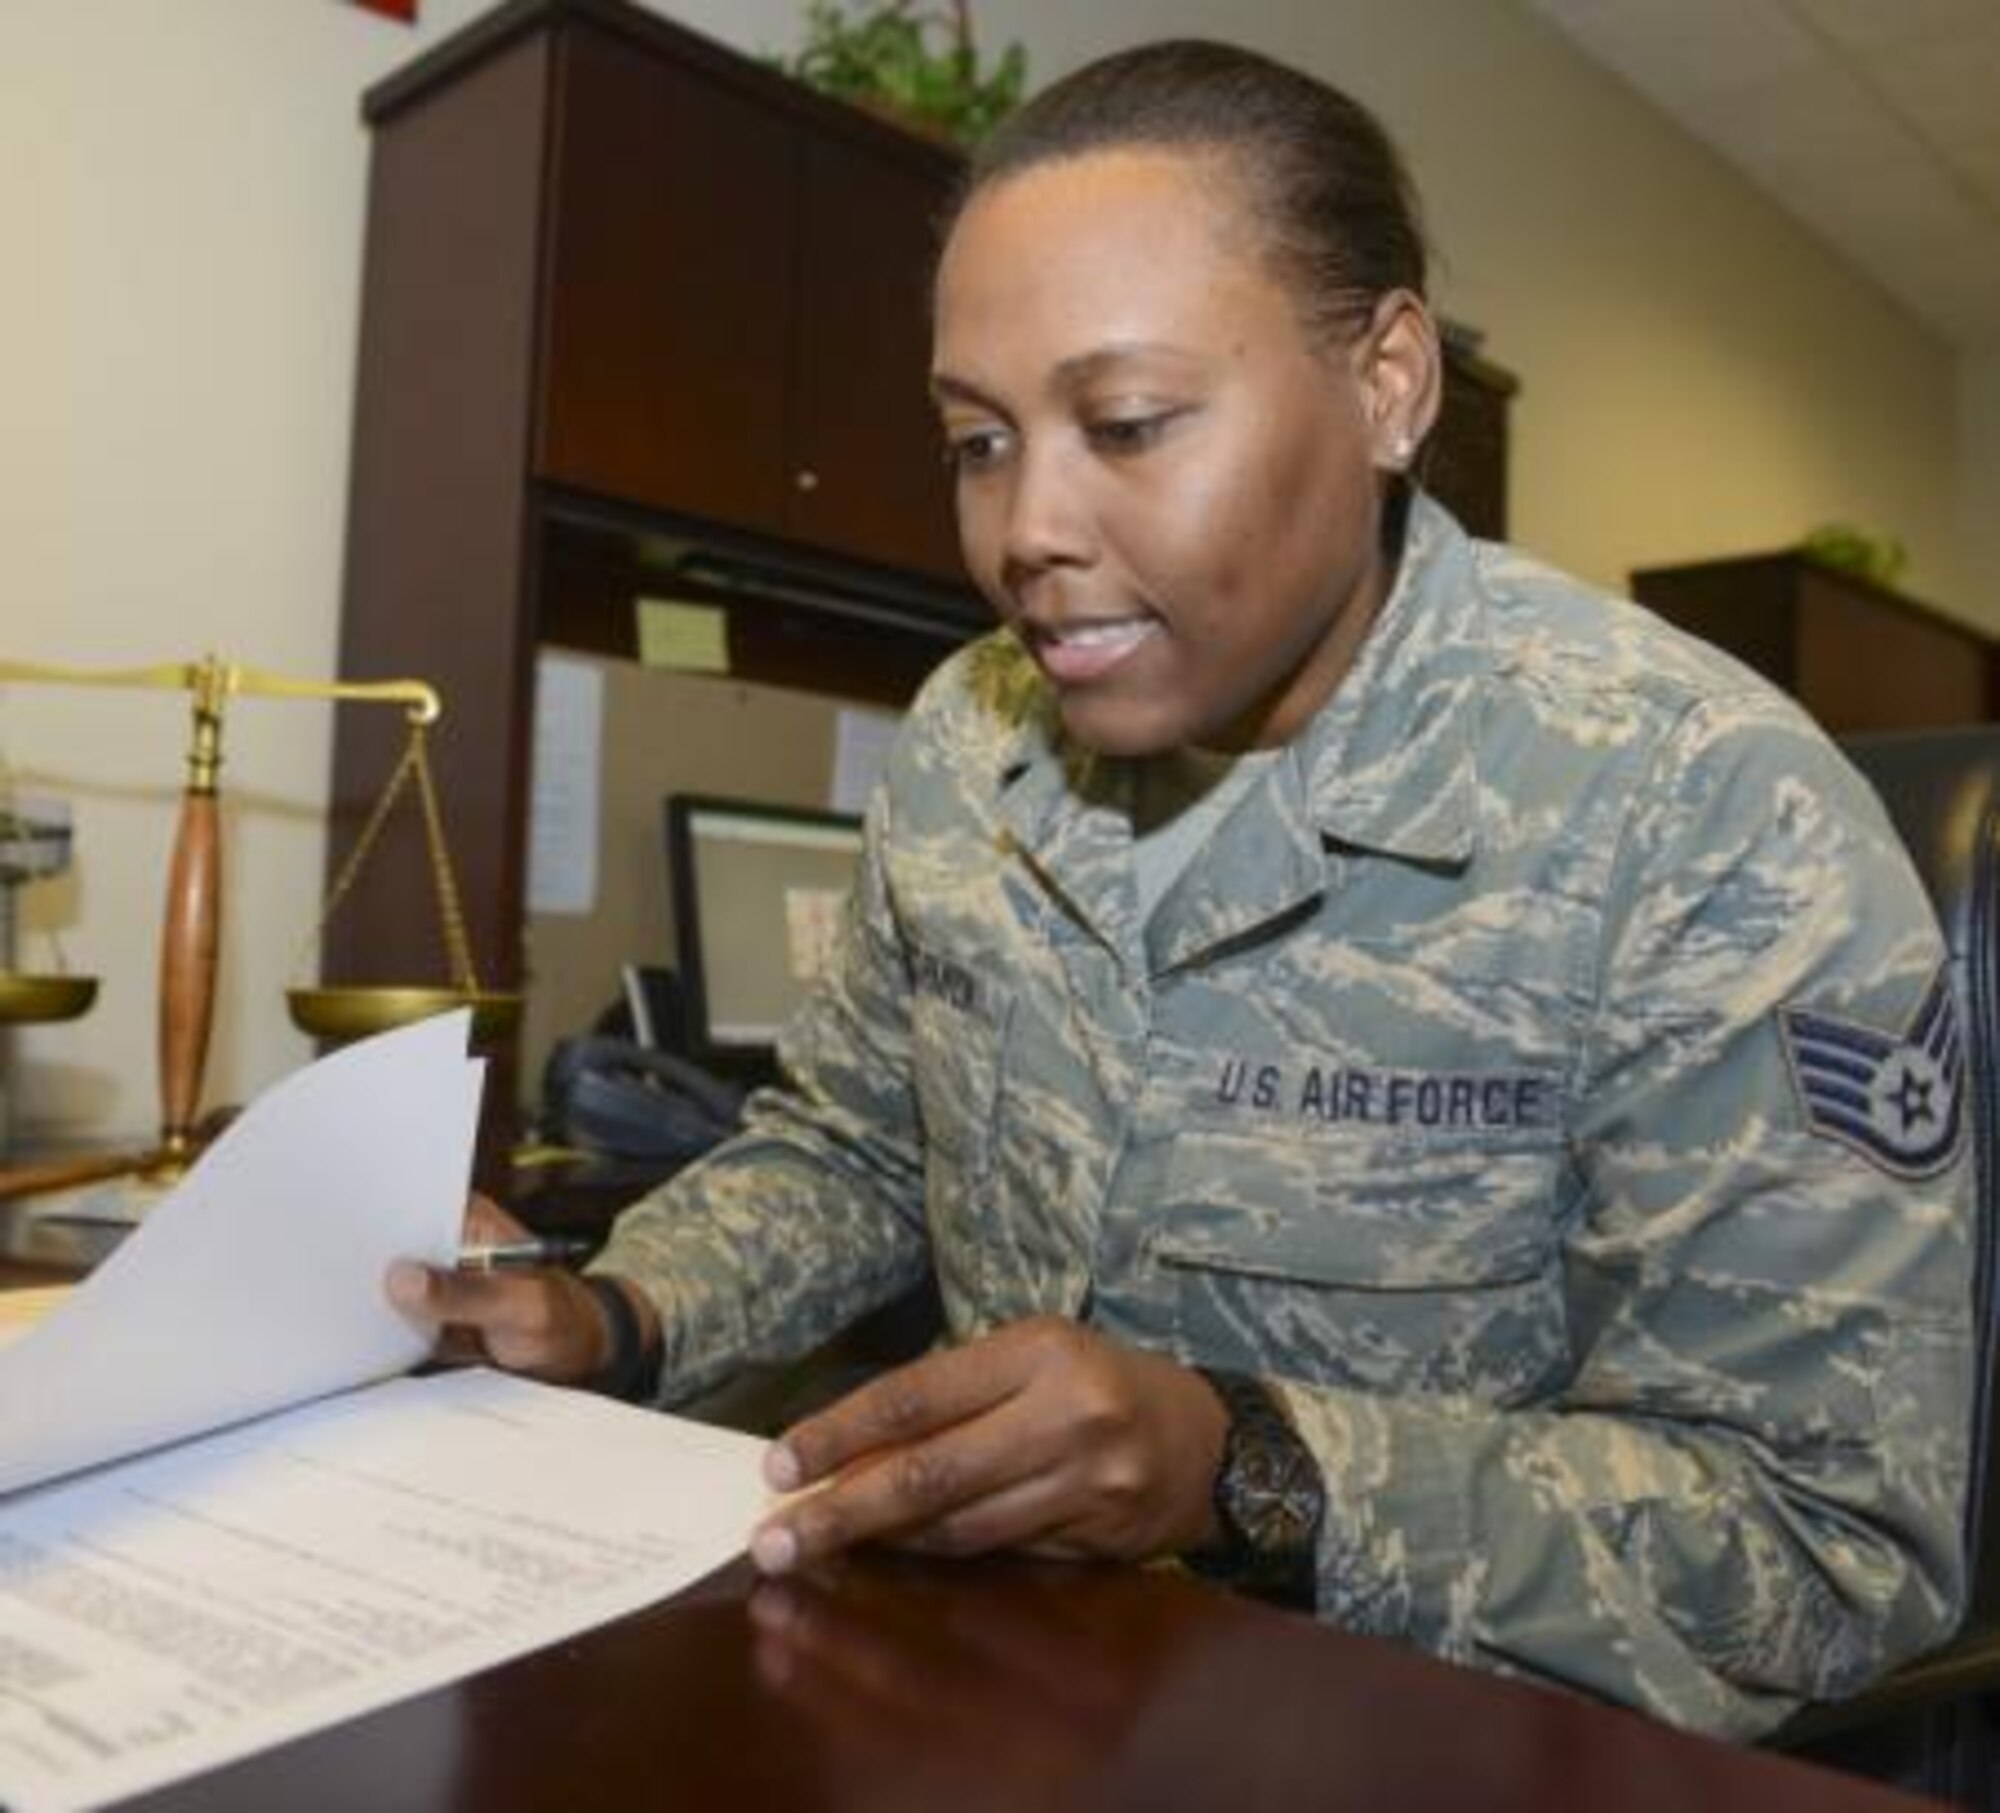 Staff Sgt. Barricia McCormick Georgia Air National Guard, reviews legal cases during a drill weekend Feb. 8, 2014, at Robins Air Force Base, Ga. McCormick, who comes from a long line of family members who have served in the armed forces dating back to World War I, is related to Harriet Ross Tubman, the African-American abolitionist and humanitarian responsible for the rescue of more than 300 slaves through the underground railroad. McCormick is a paralegal with the 116th Air Control Wing. (Georgia Air National Guard photo/Master Sgt. Roger Parsons)